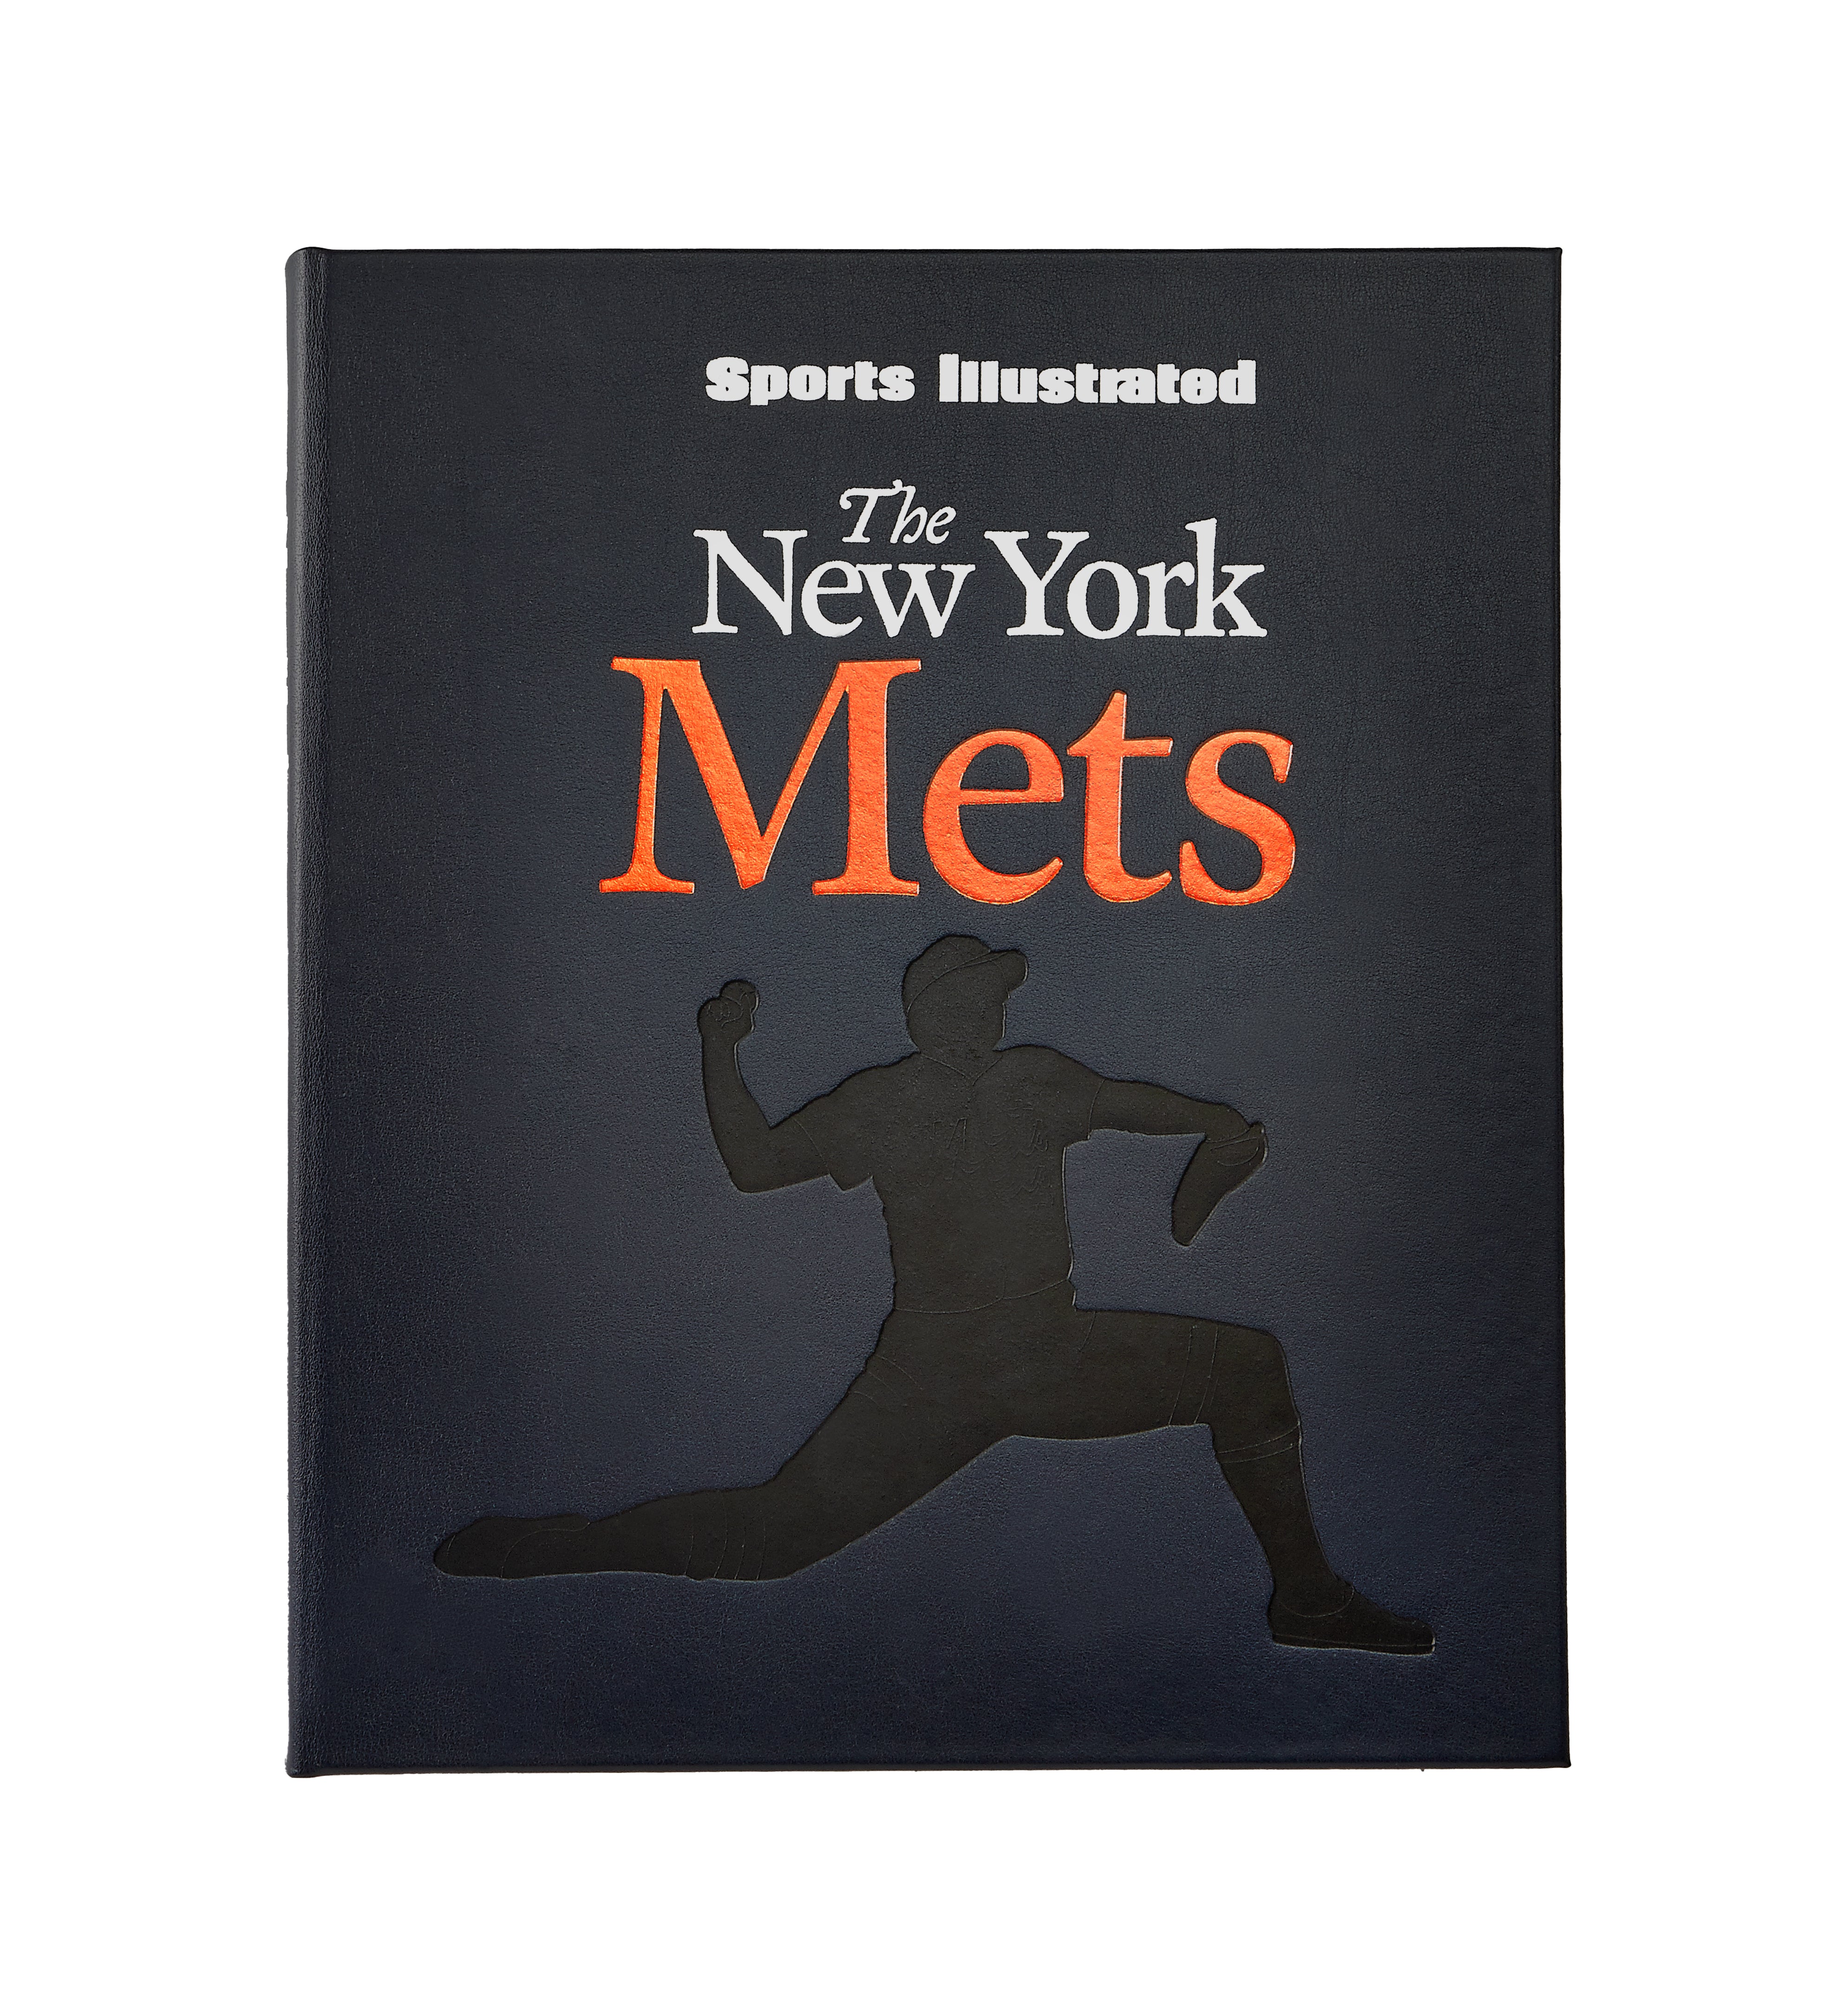 New York Mets on X: Brightening up this rainy Sunday with some